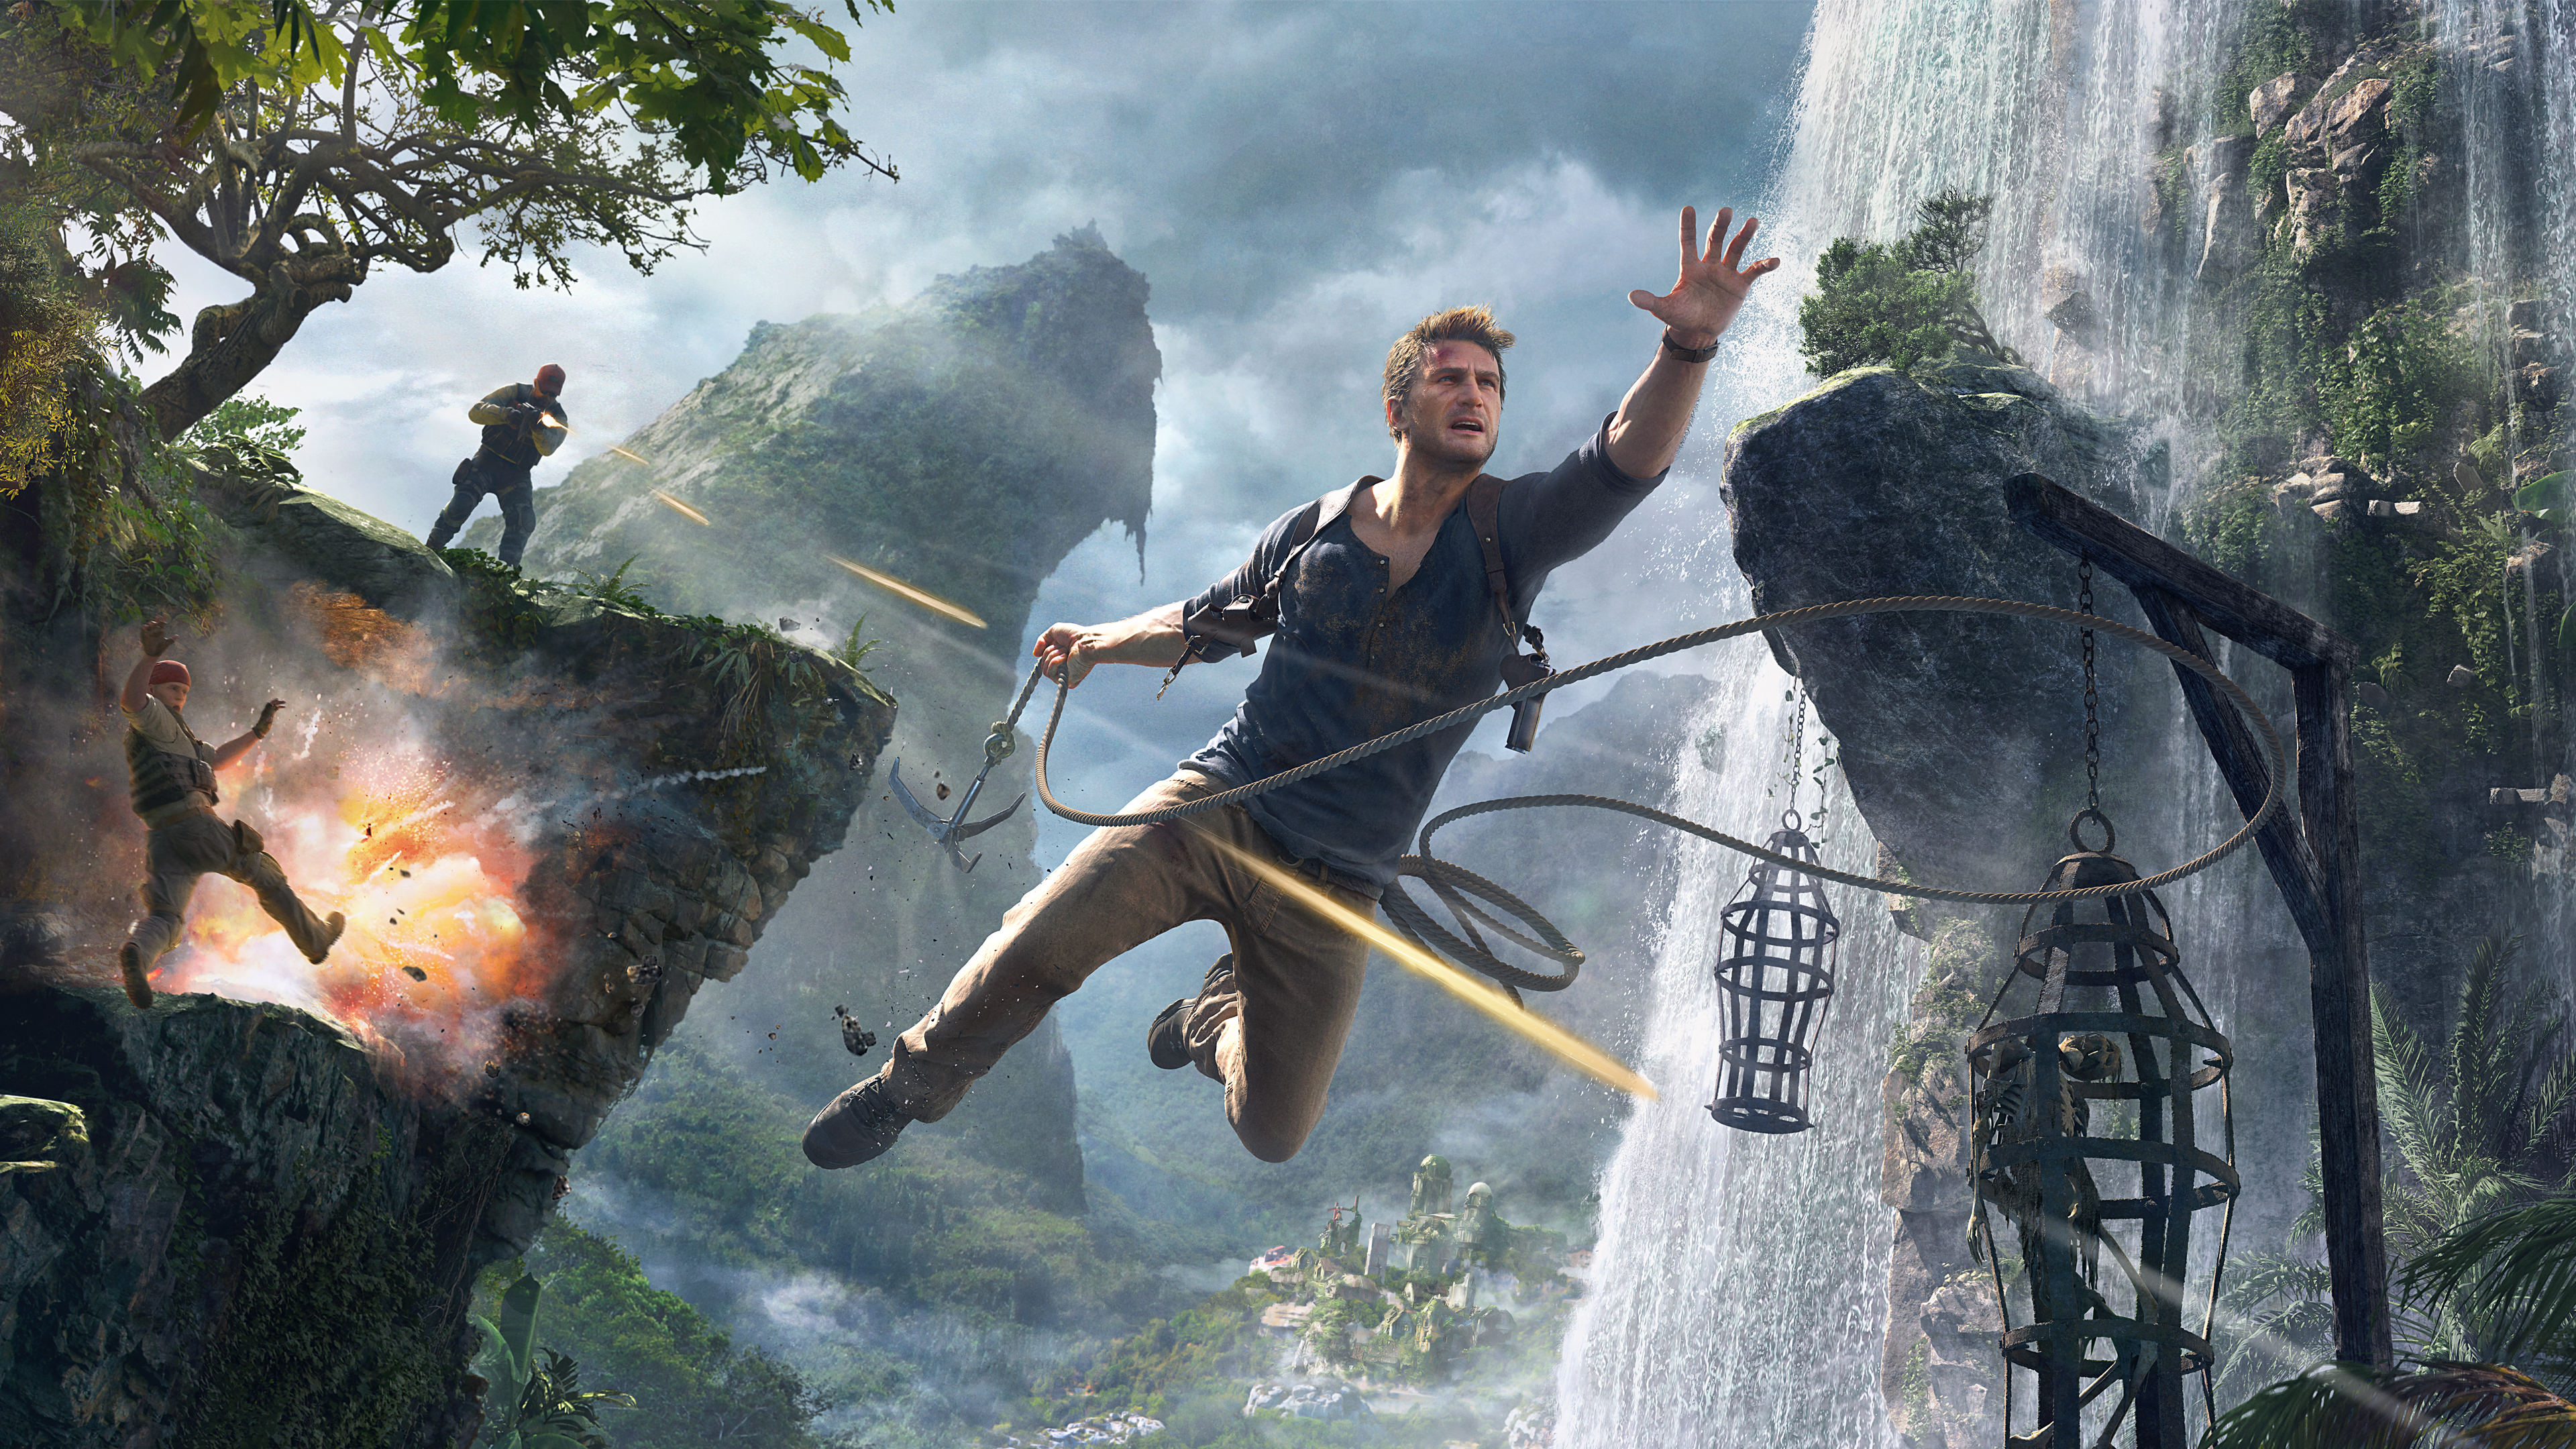 uncharted 4: a thief's end, uncharted, video game, nathan drake